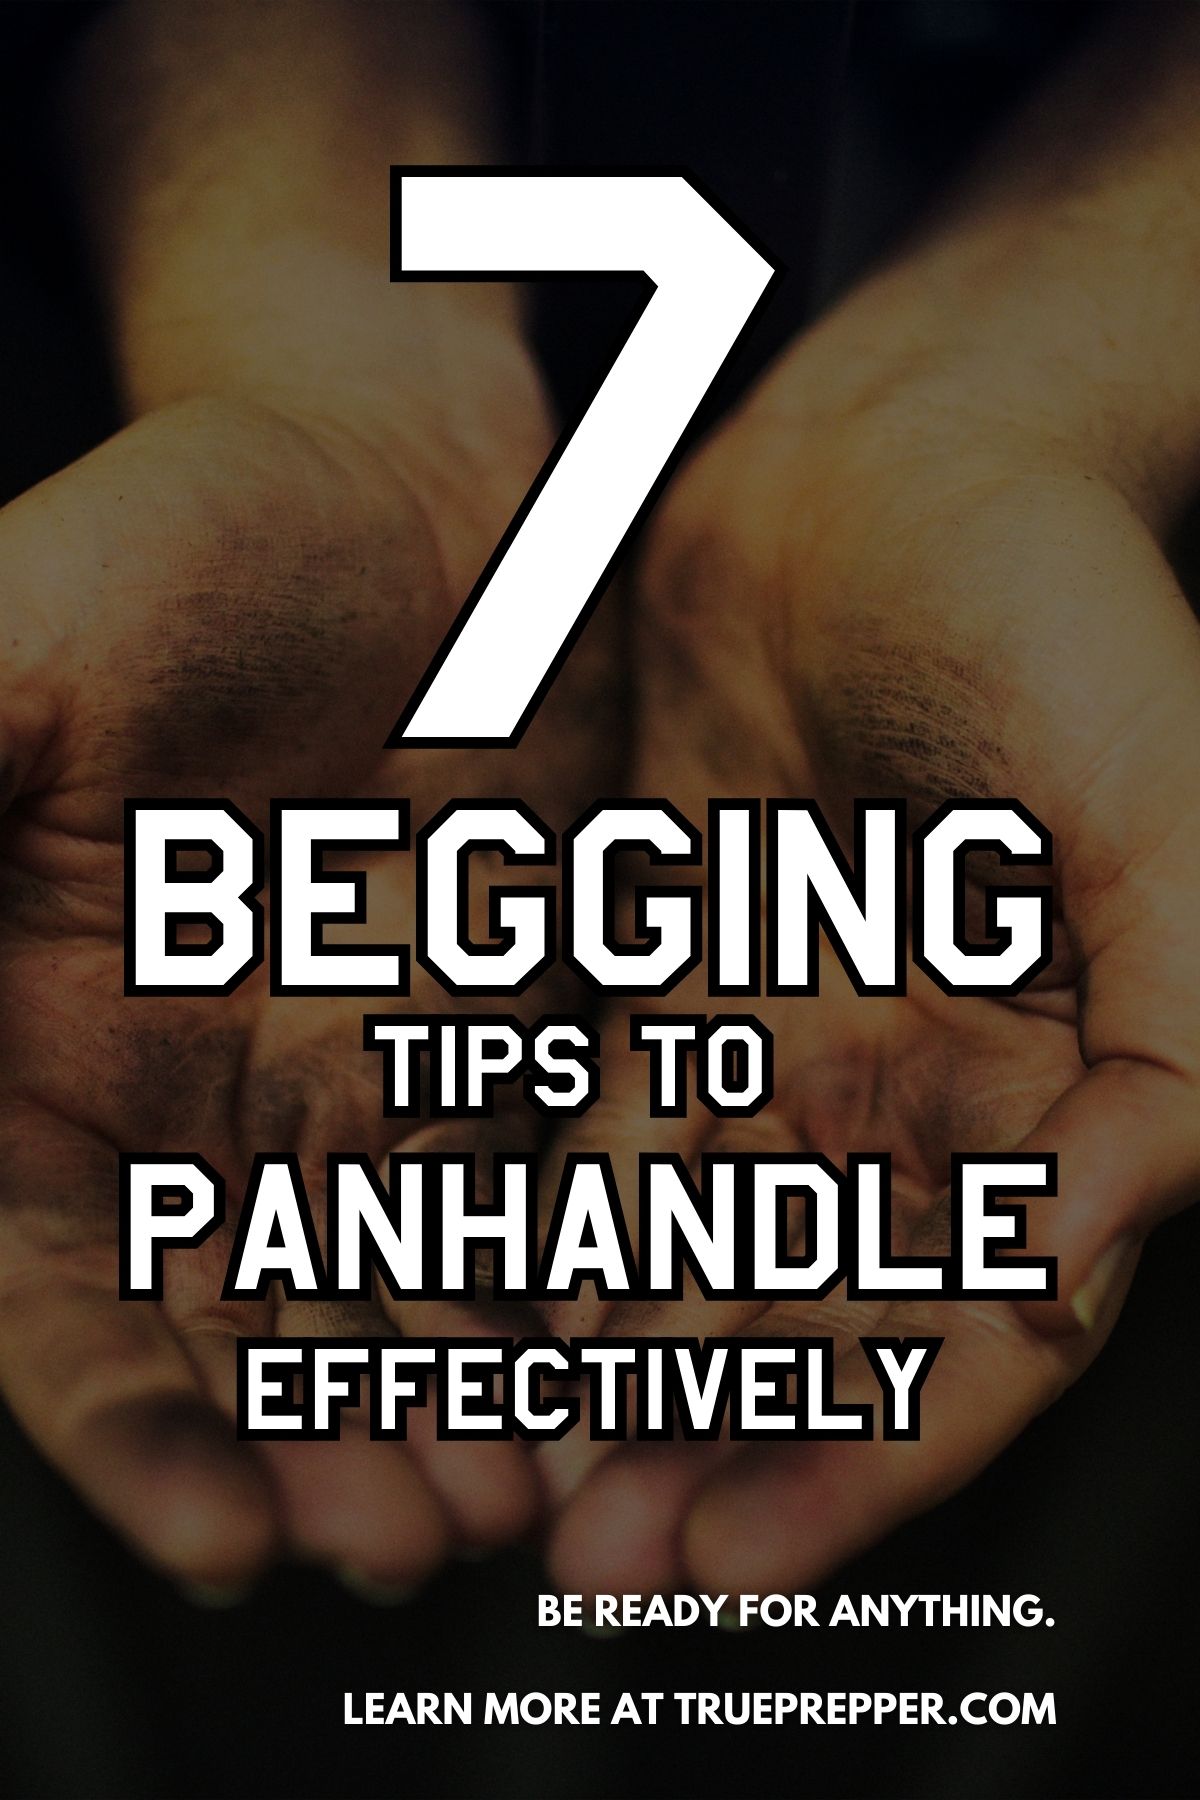 7 Begging Tips to Panhandle Effectively